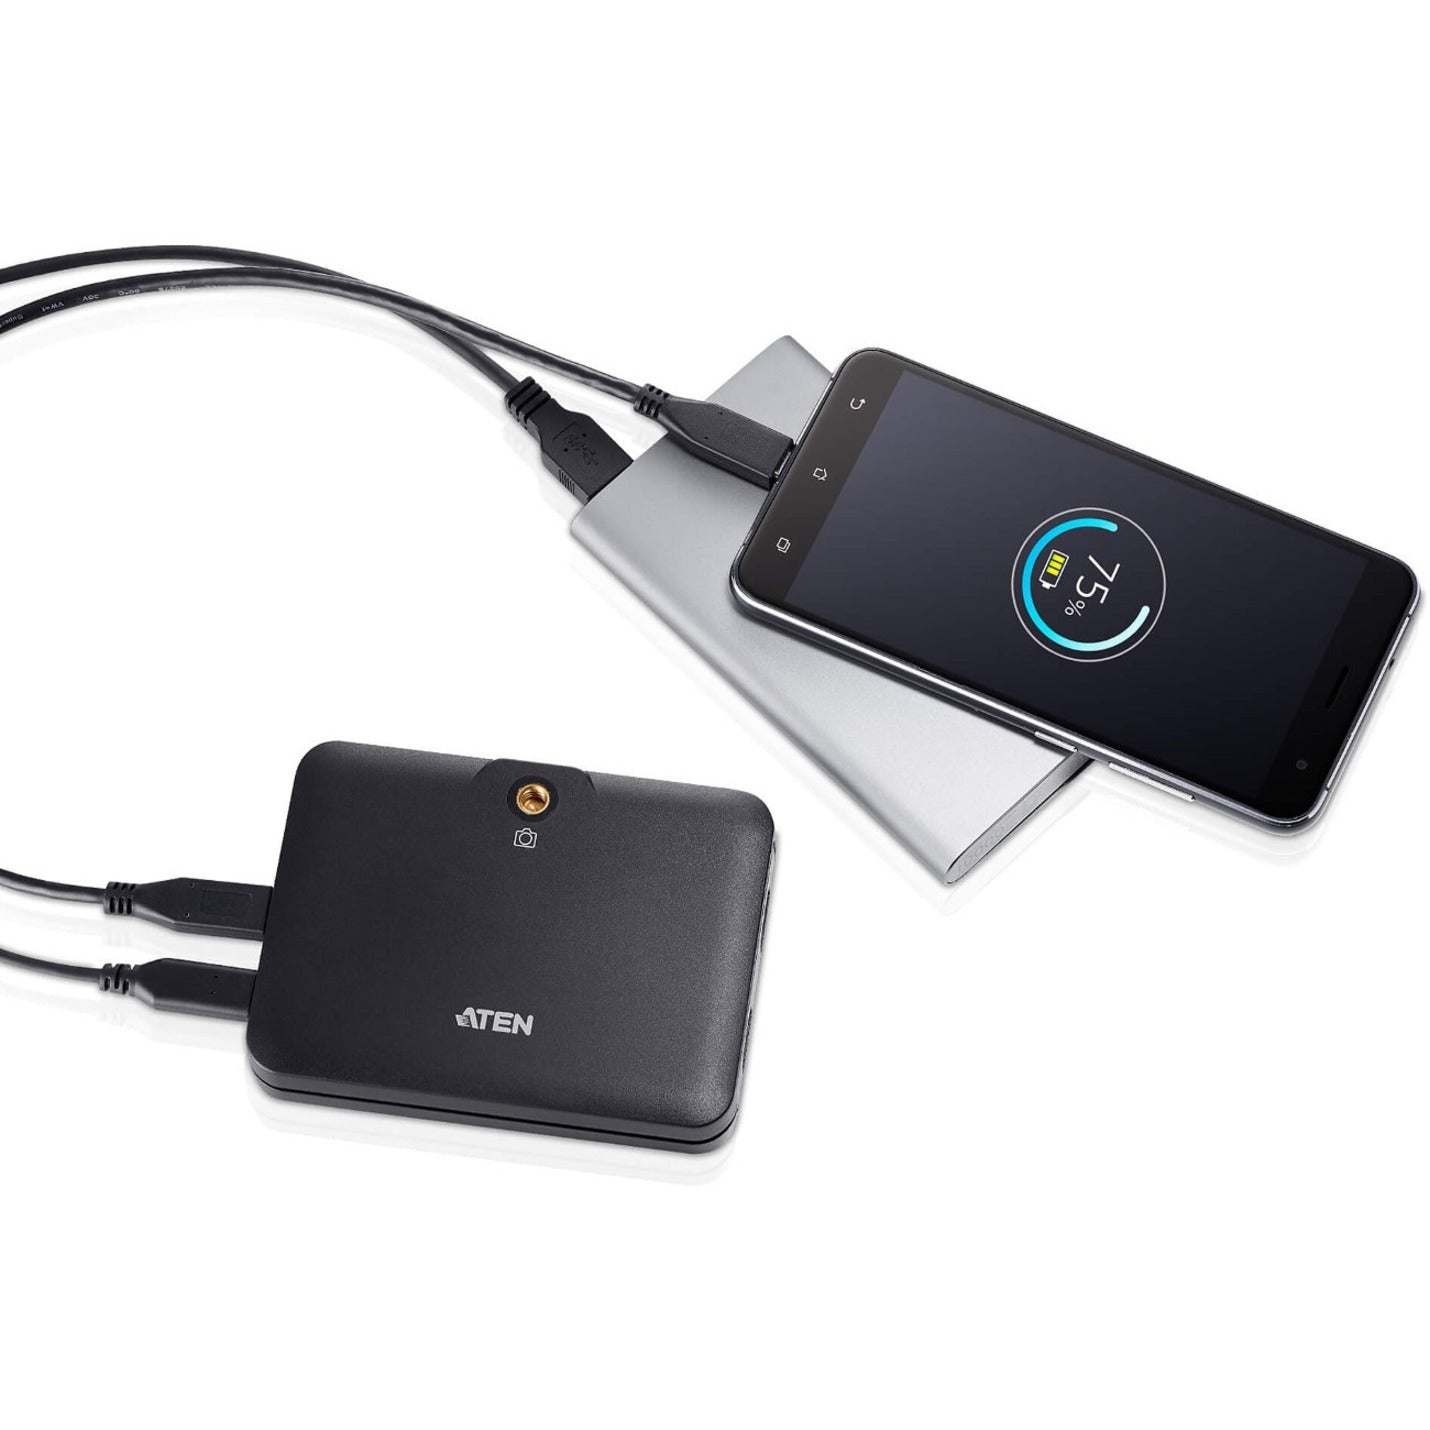 ATEN UC3021 CAMLIVE+ HDMI to USB-C UVC Video Capture with PD3.0 Power Pass-Through, Video Capturing Device